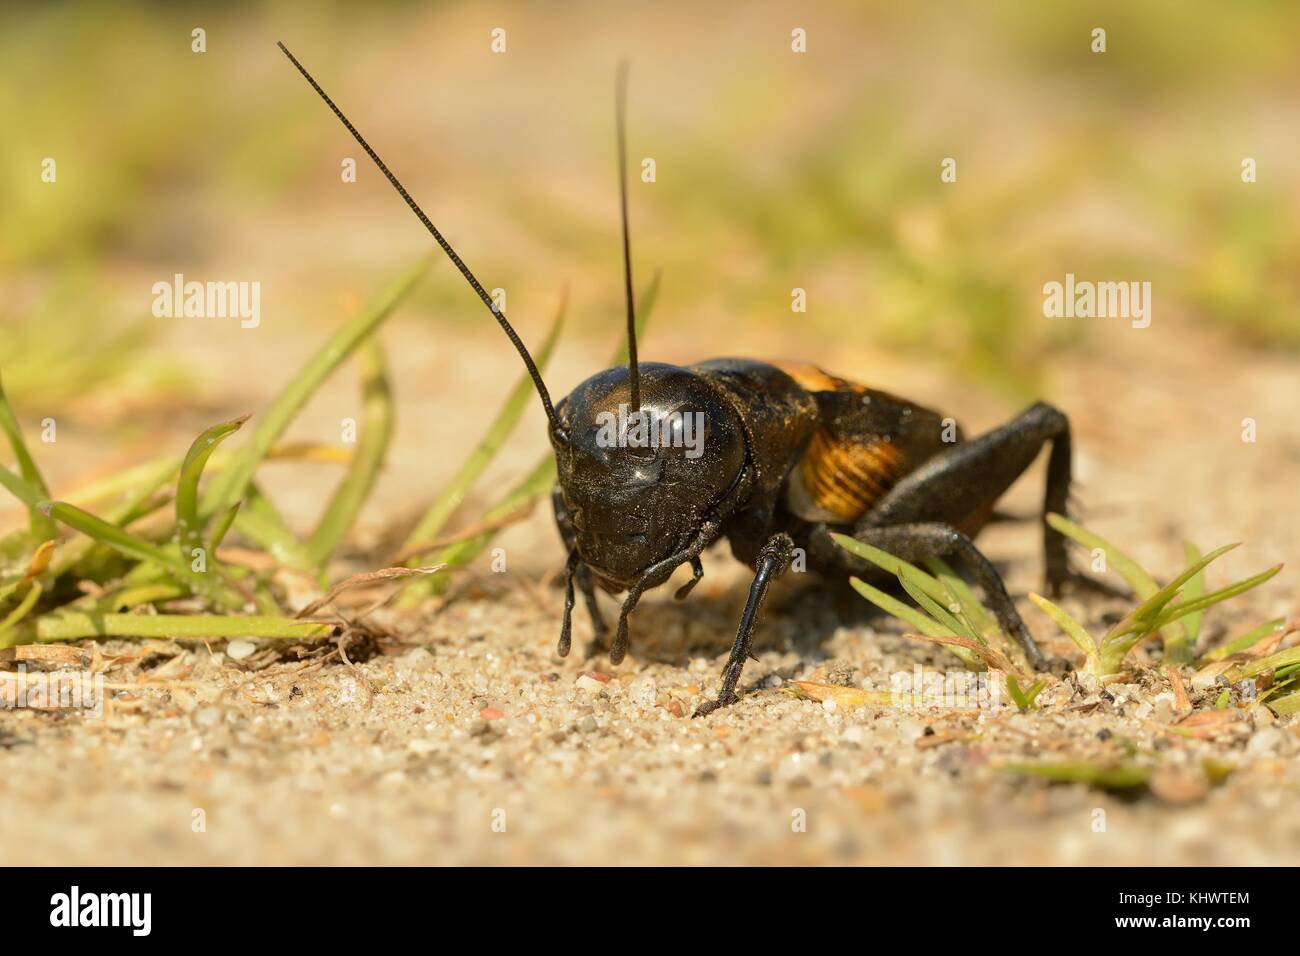 The field cricket - Gryllus campestris on the eath. Black cricket on the brown bright clay. Stock Photo